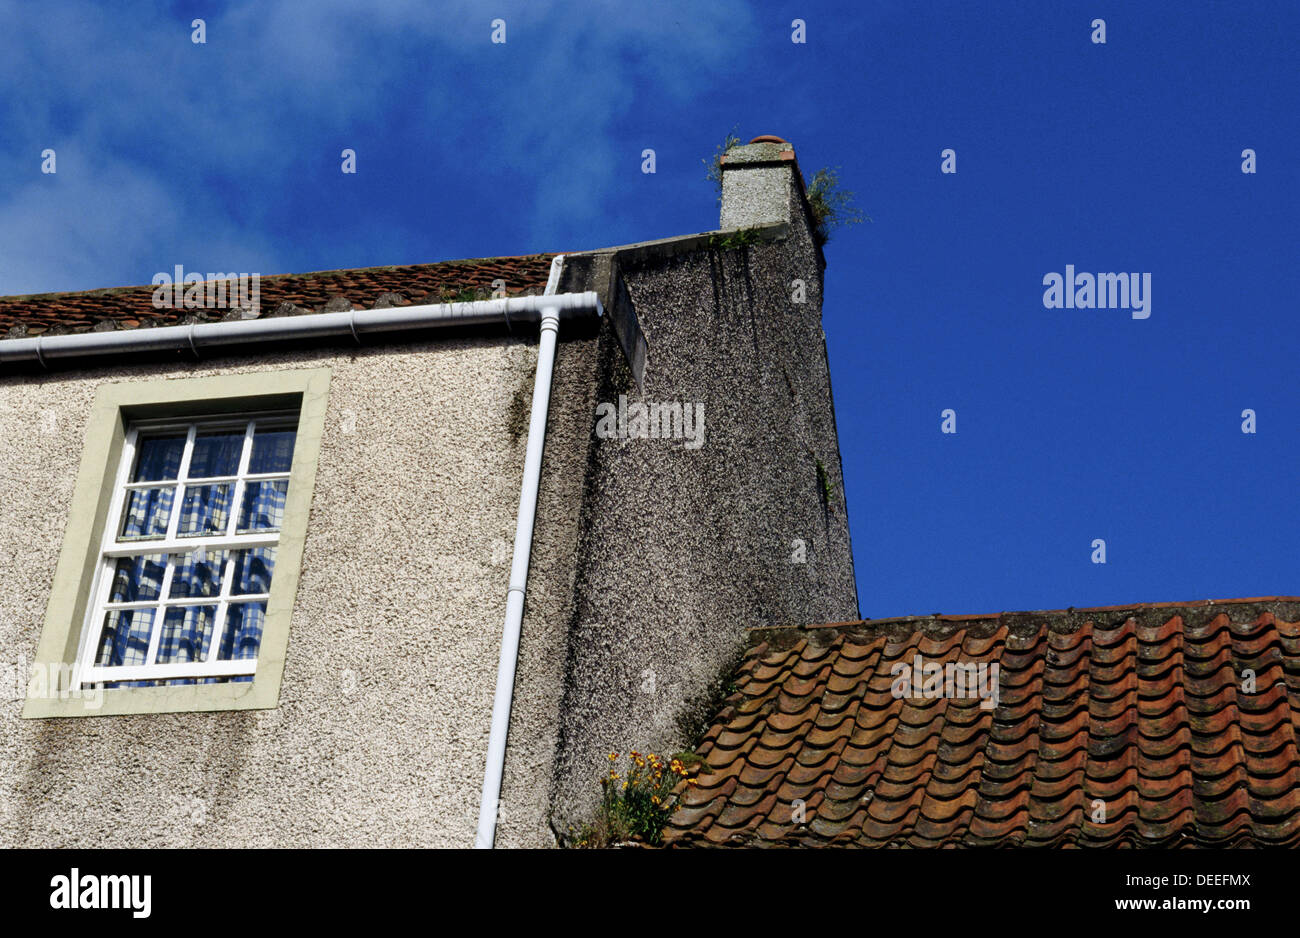 Red tiled roof and flowers in gutter. Crail. Scotland Stock Photo